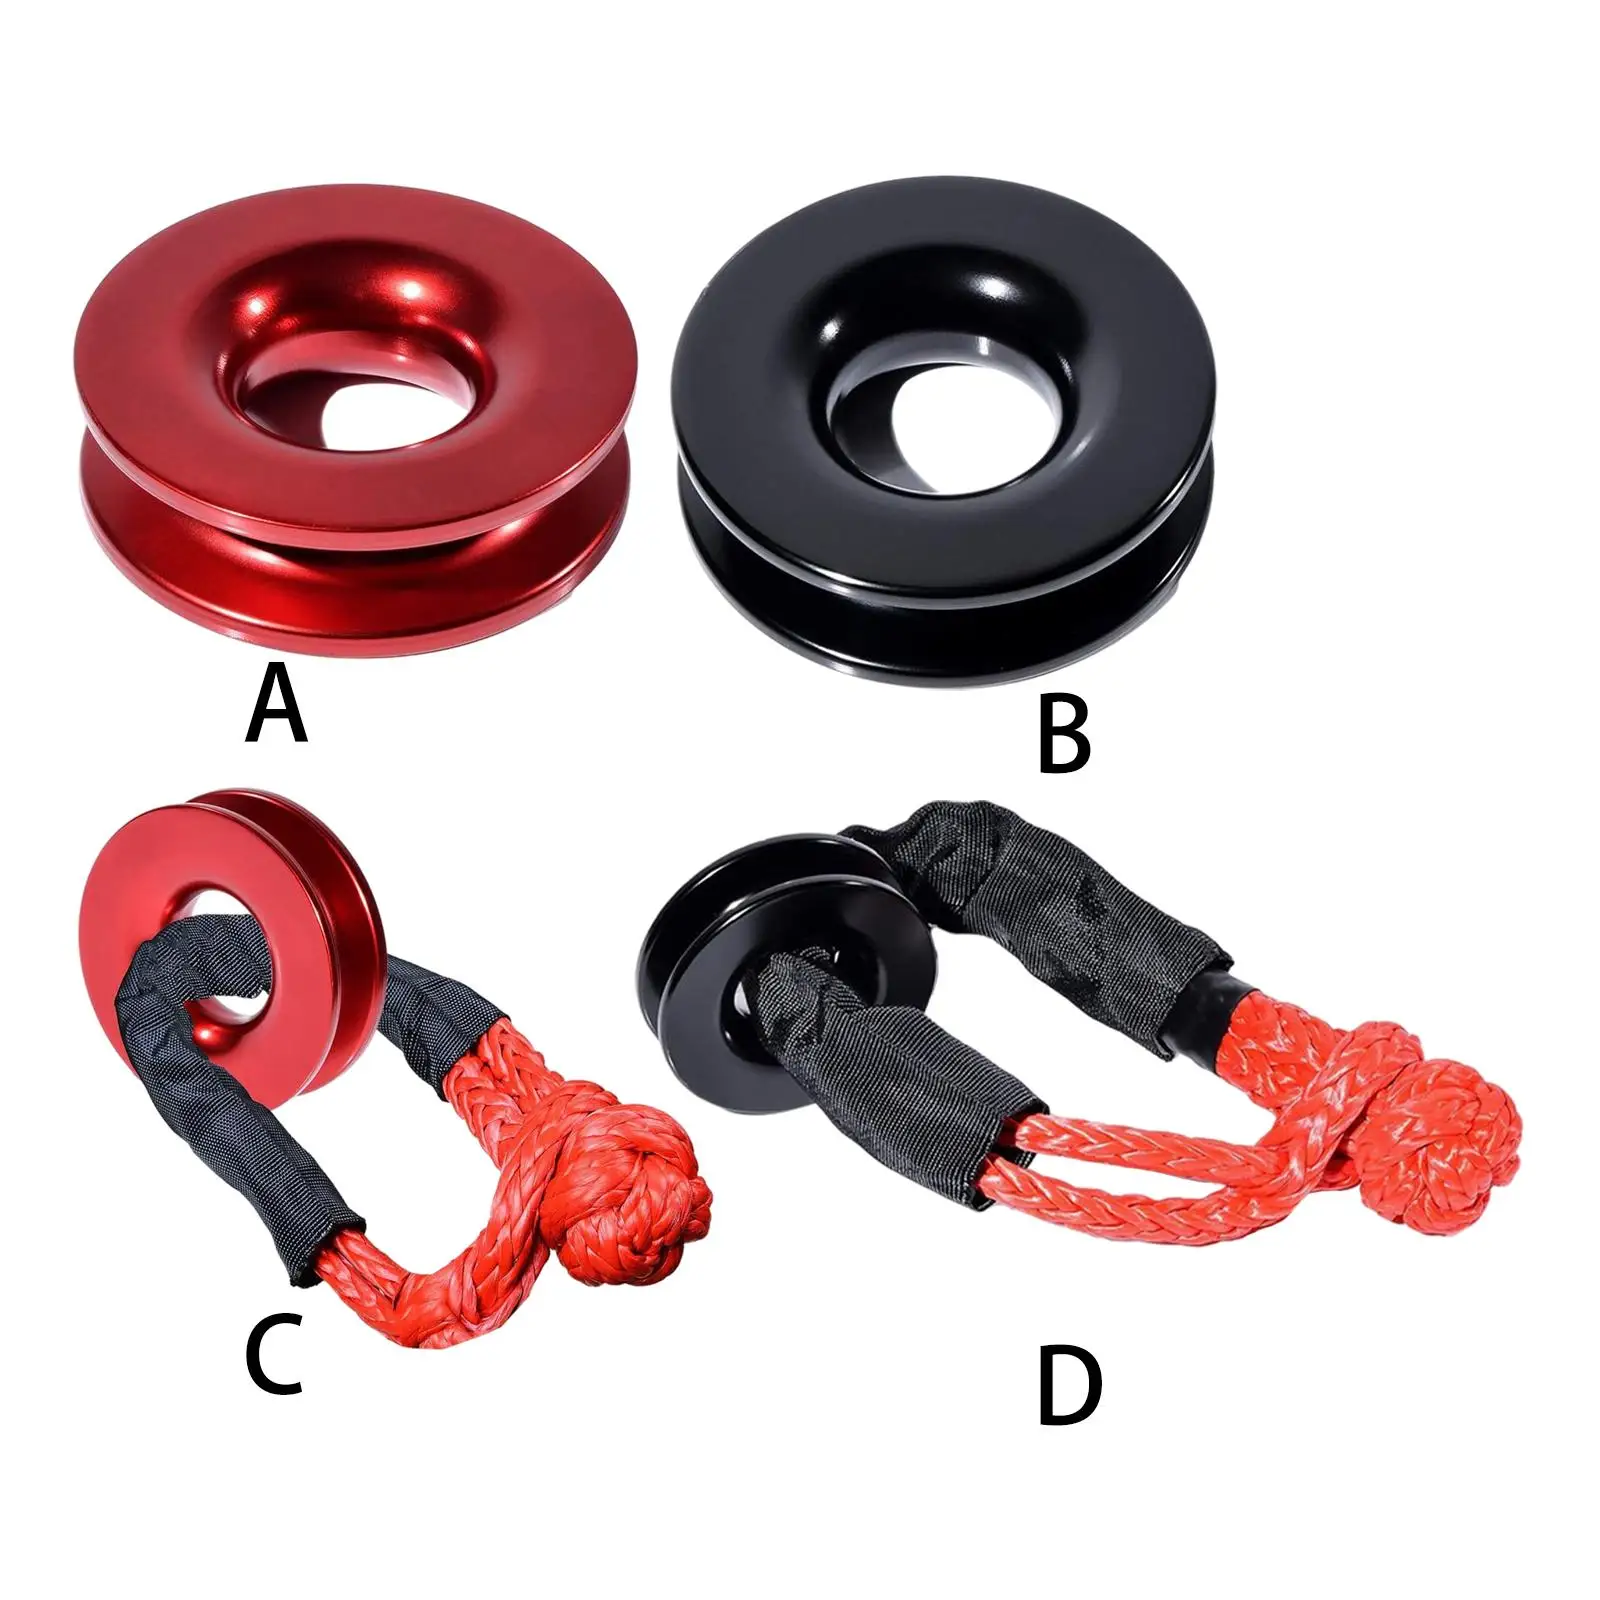 Winch Snatch Recovery Ring 38000 lbs Winch Soft Shackle Snatch Ring Block Towing Car Breakdowns Depot ATV UTV Cars Marine Boat